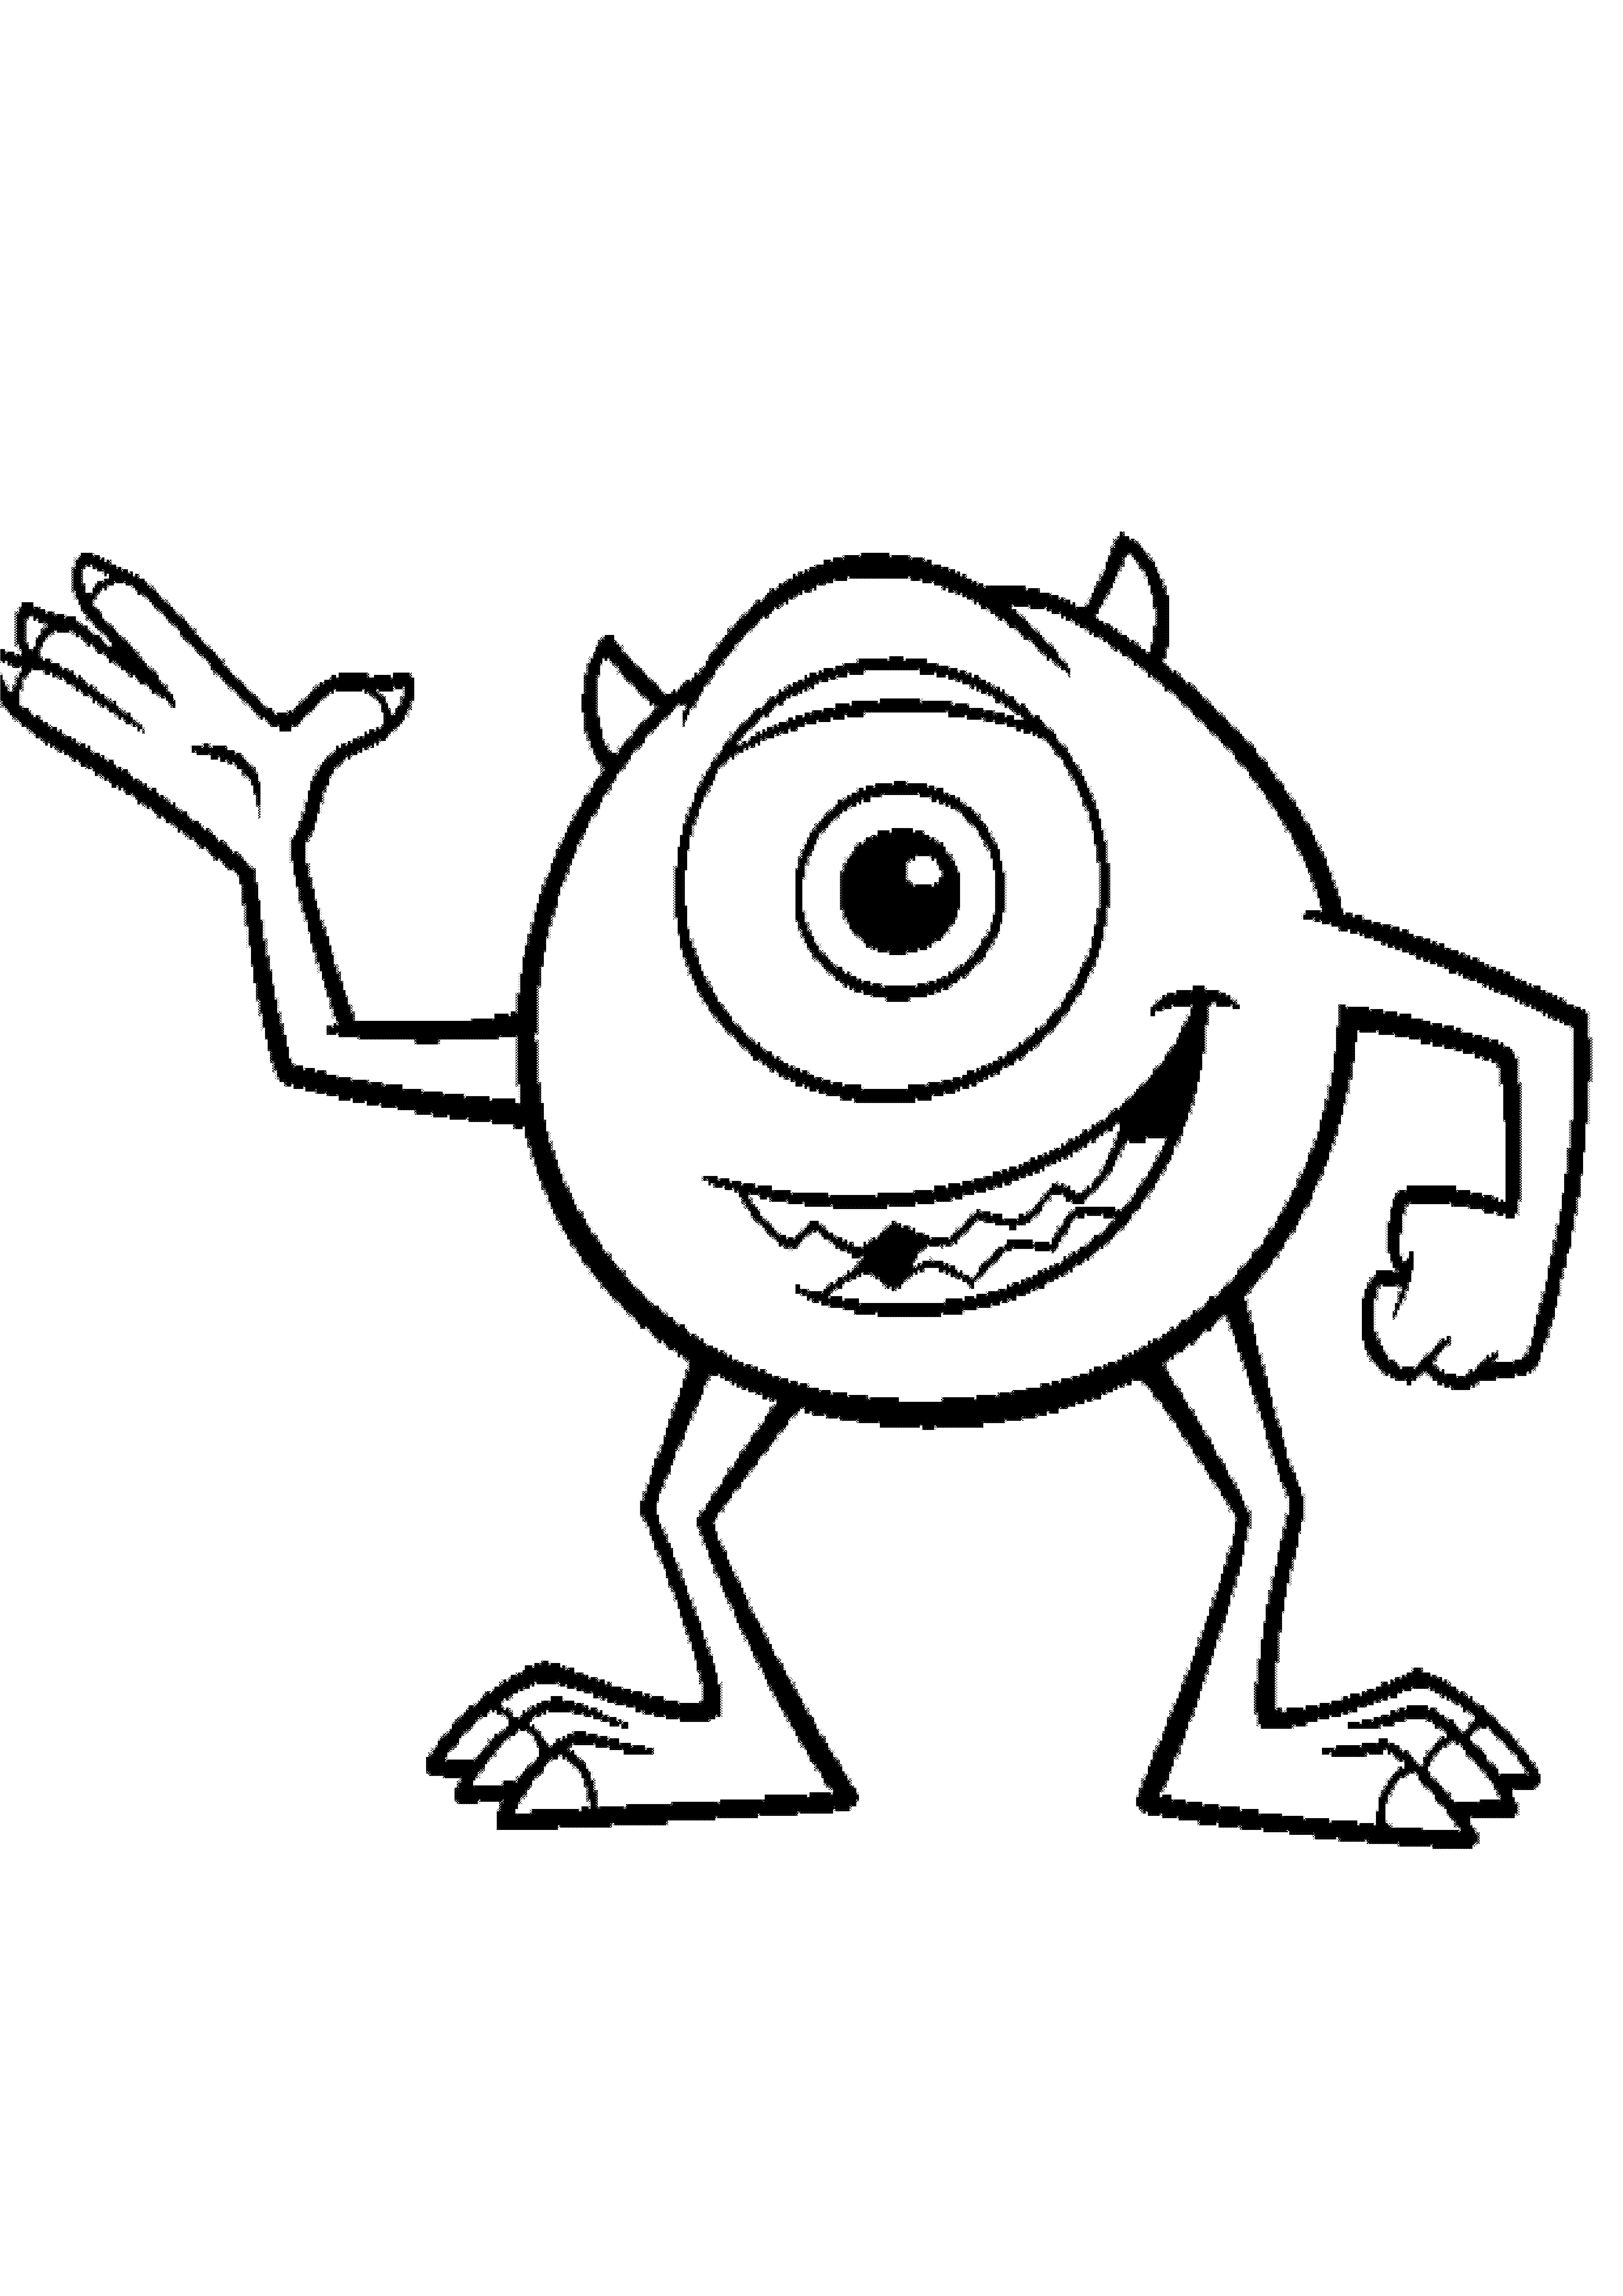 Monsters Inc Printable Coloring Pages - Printable World Holiday